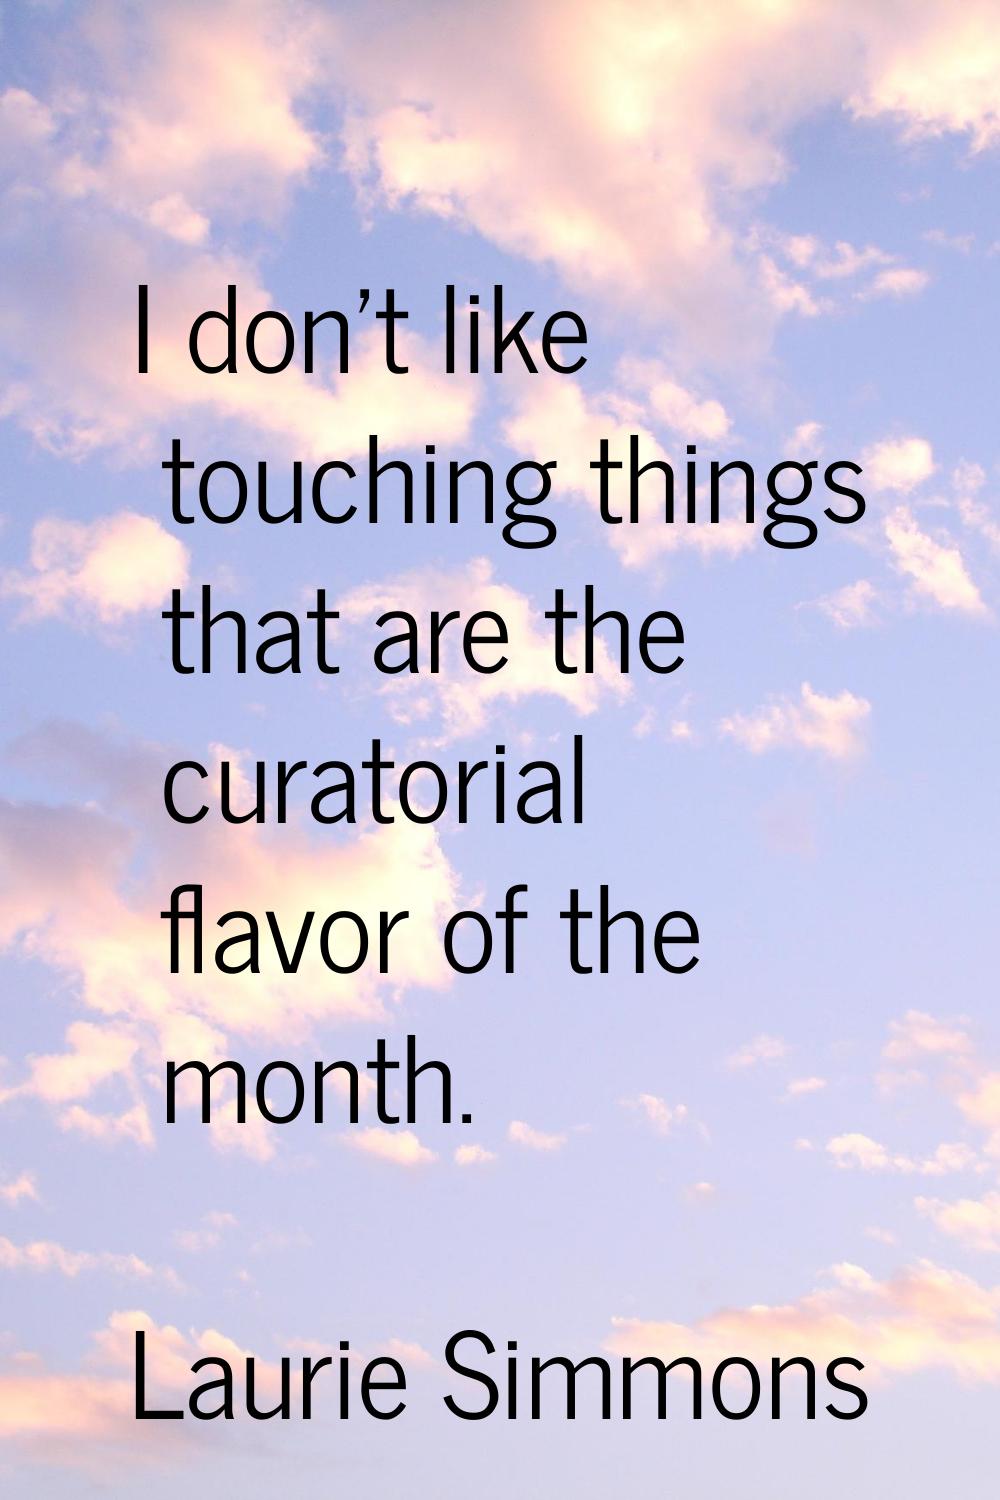 I don't like touching things that are the curatorial flavor of the month.